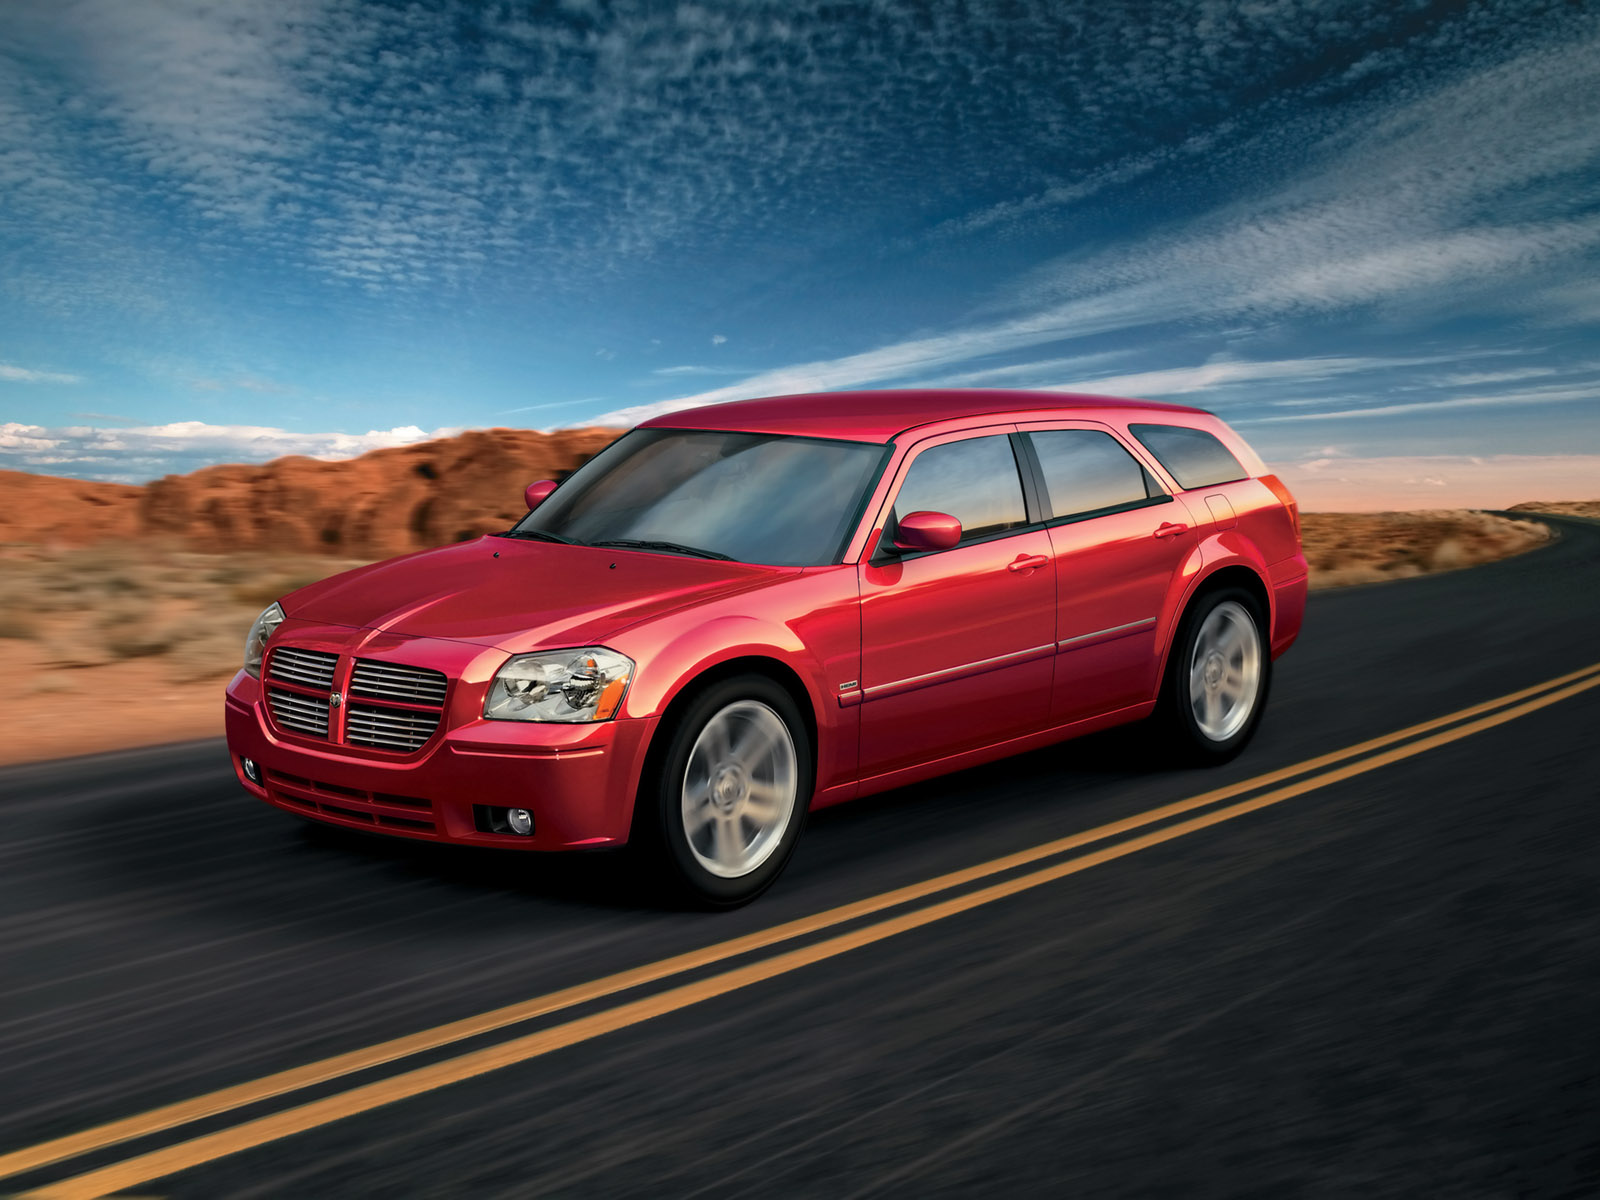 Dodge Magnum Wallpaper And Image Pictures Photos